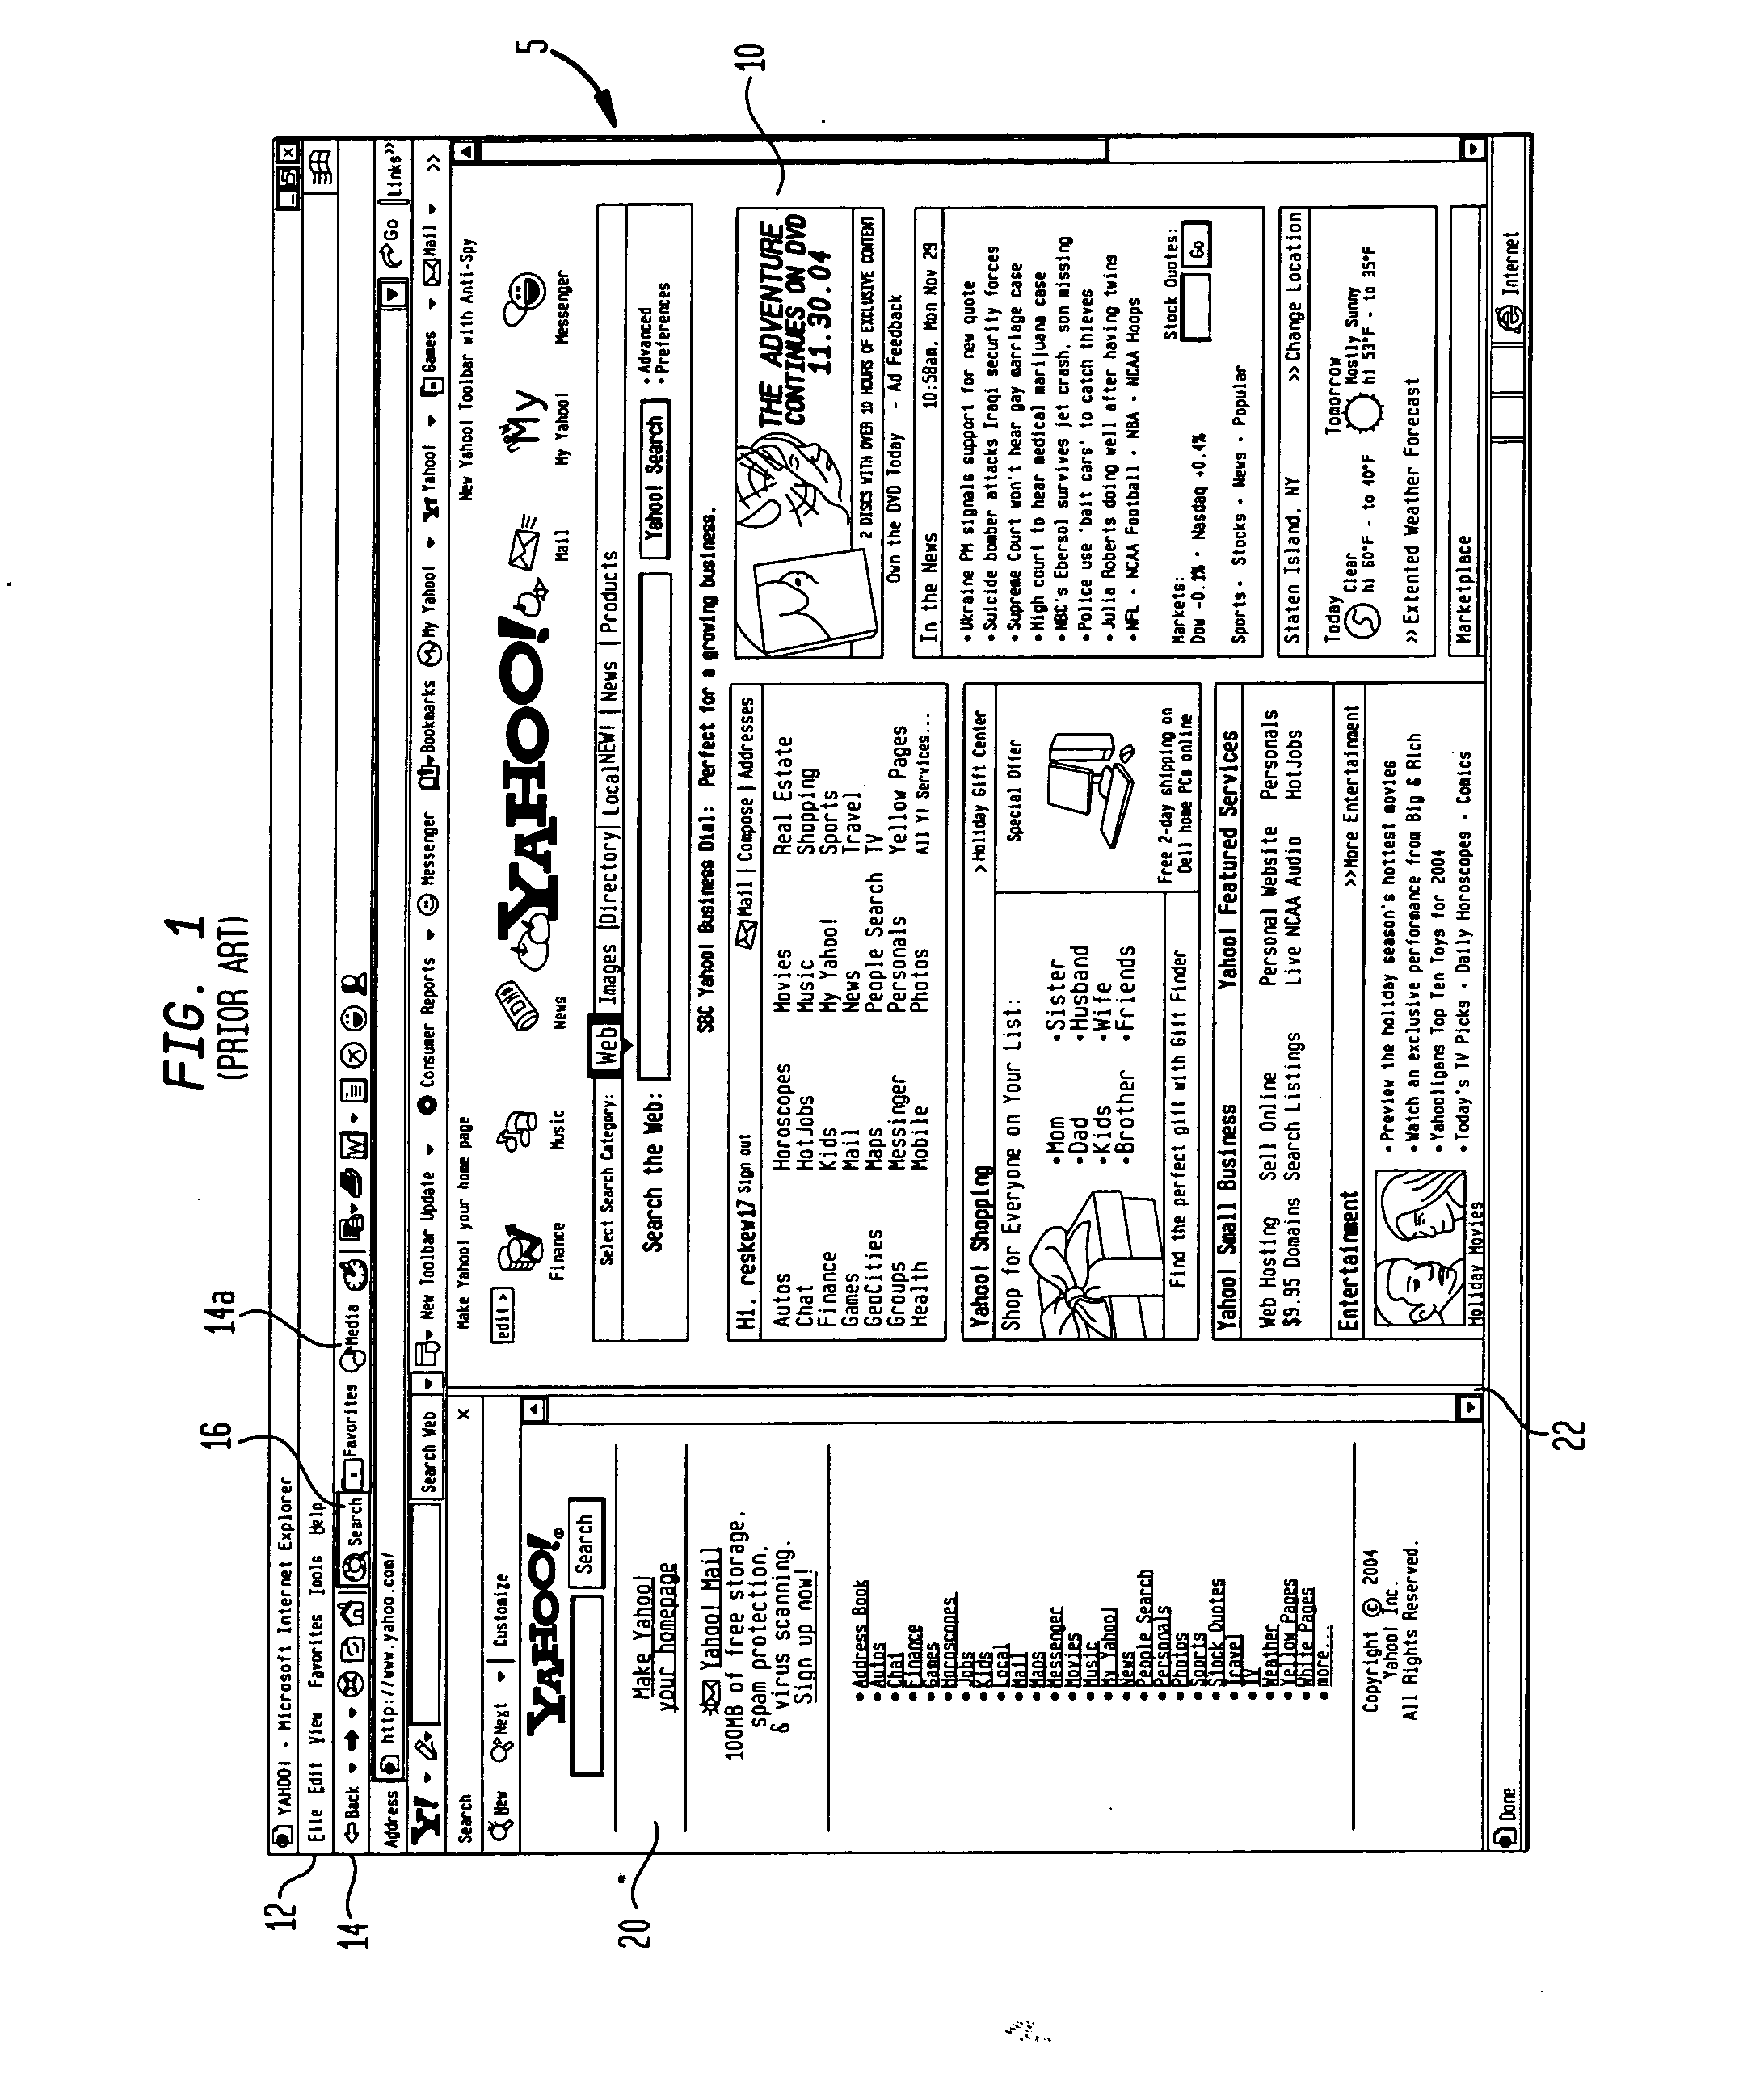 Multiple window browser interface and system and method of generating multiple window browser interface